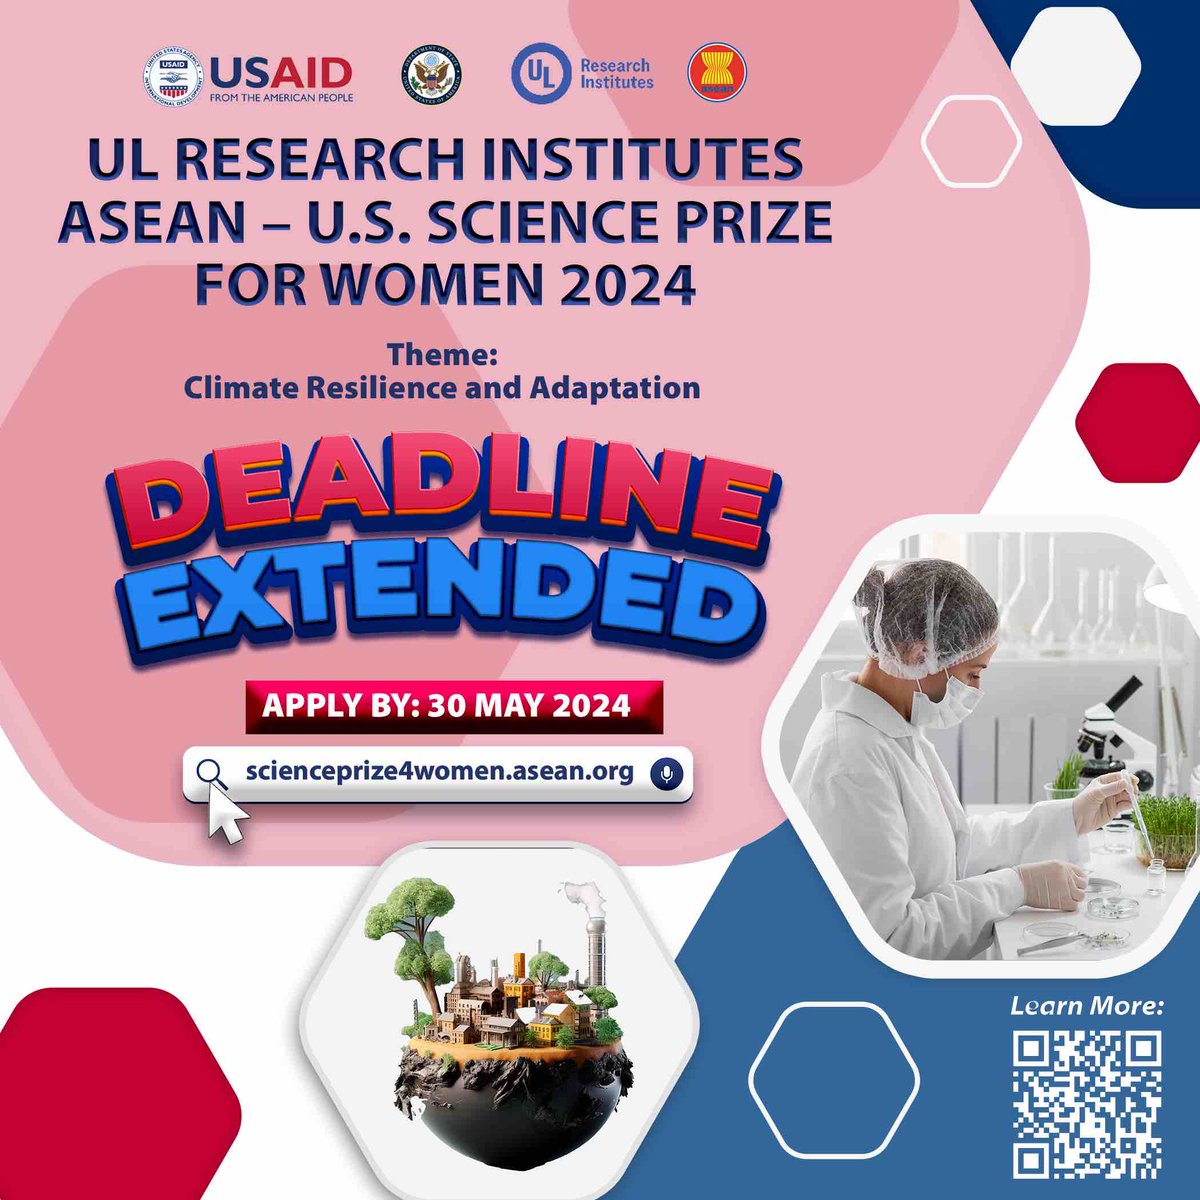 The deadline for the 2024 Science Prize for Women has been extended to 30 May 2024!👩🏻‍🔬🔬

This year, we focus on Climate Resilience & Adaptation. Submit your innovative solutions now on scienceprize4women.asean.org

#WomenInSTEM #Innovation #Research